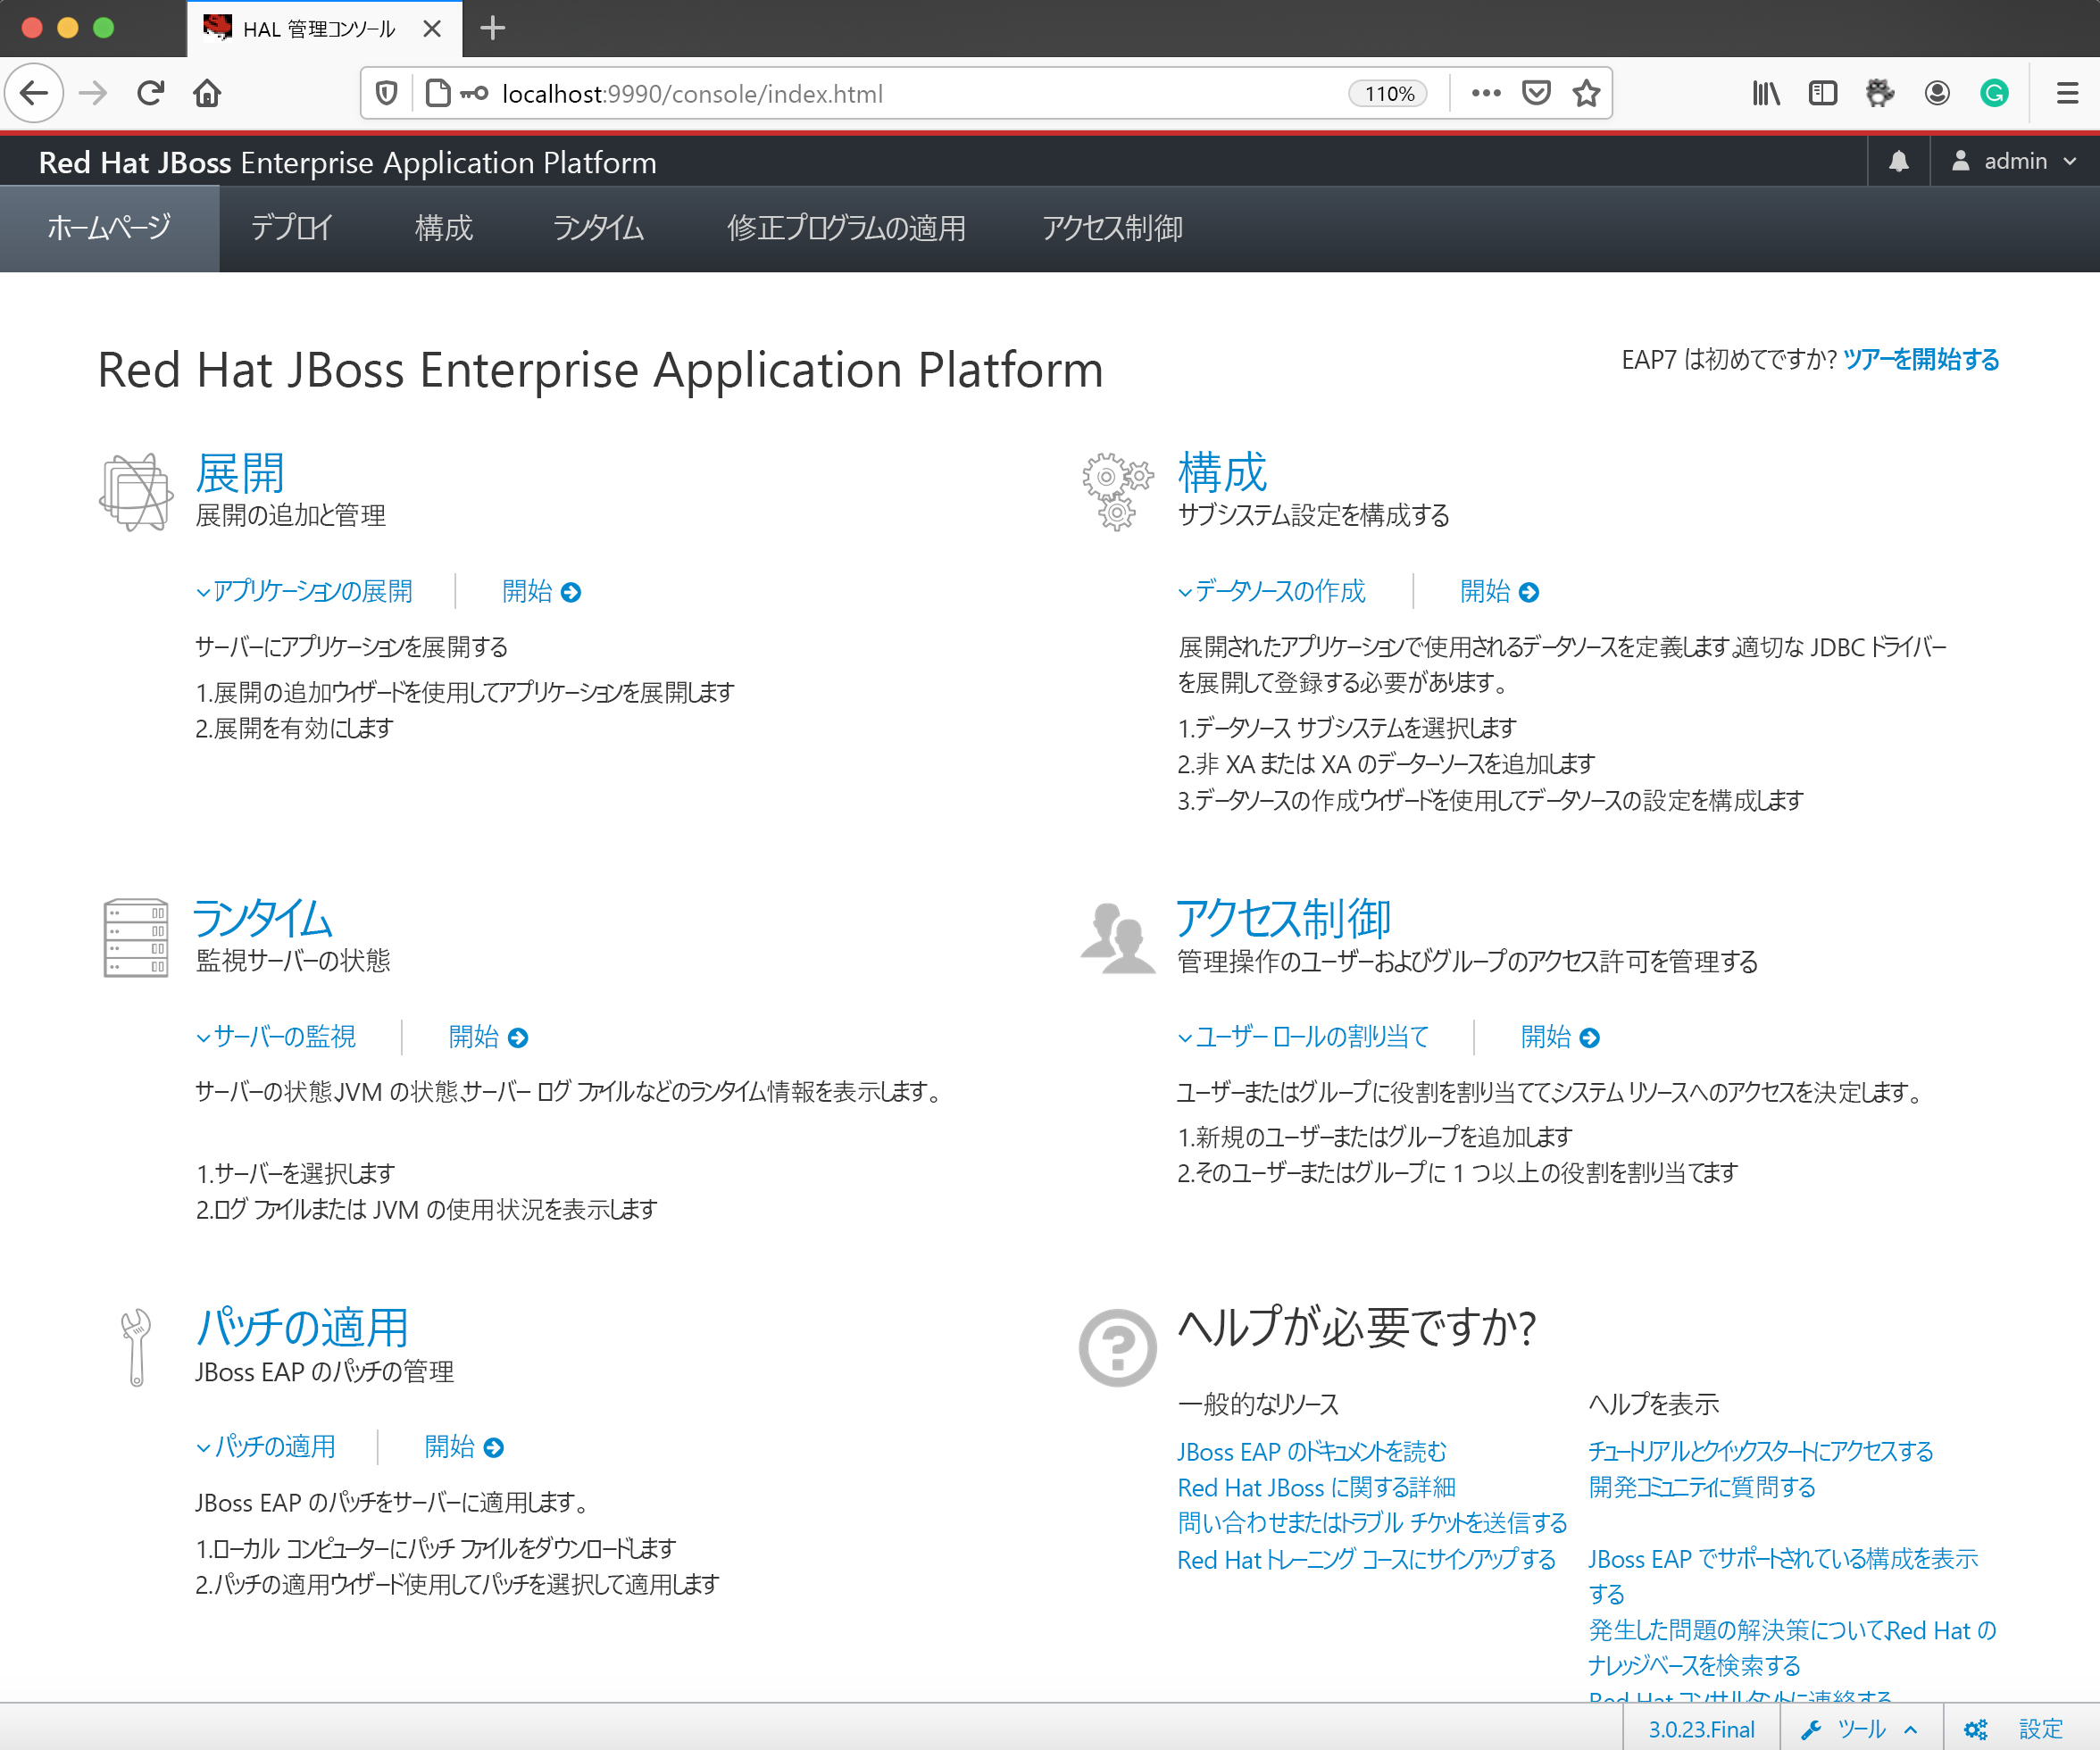 Screenshot that shows the main page of the admin console.